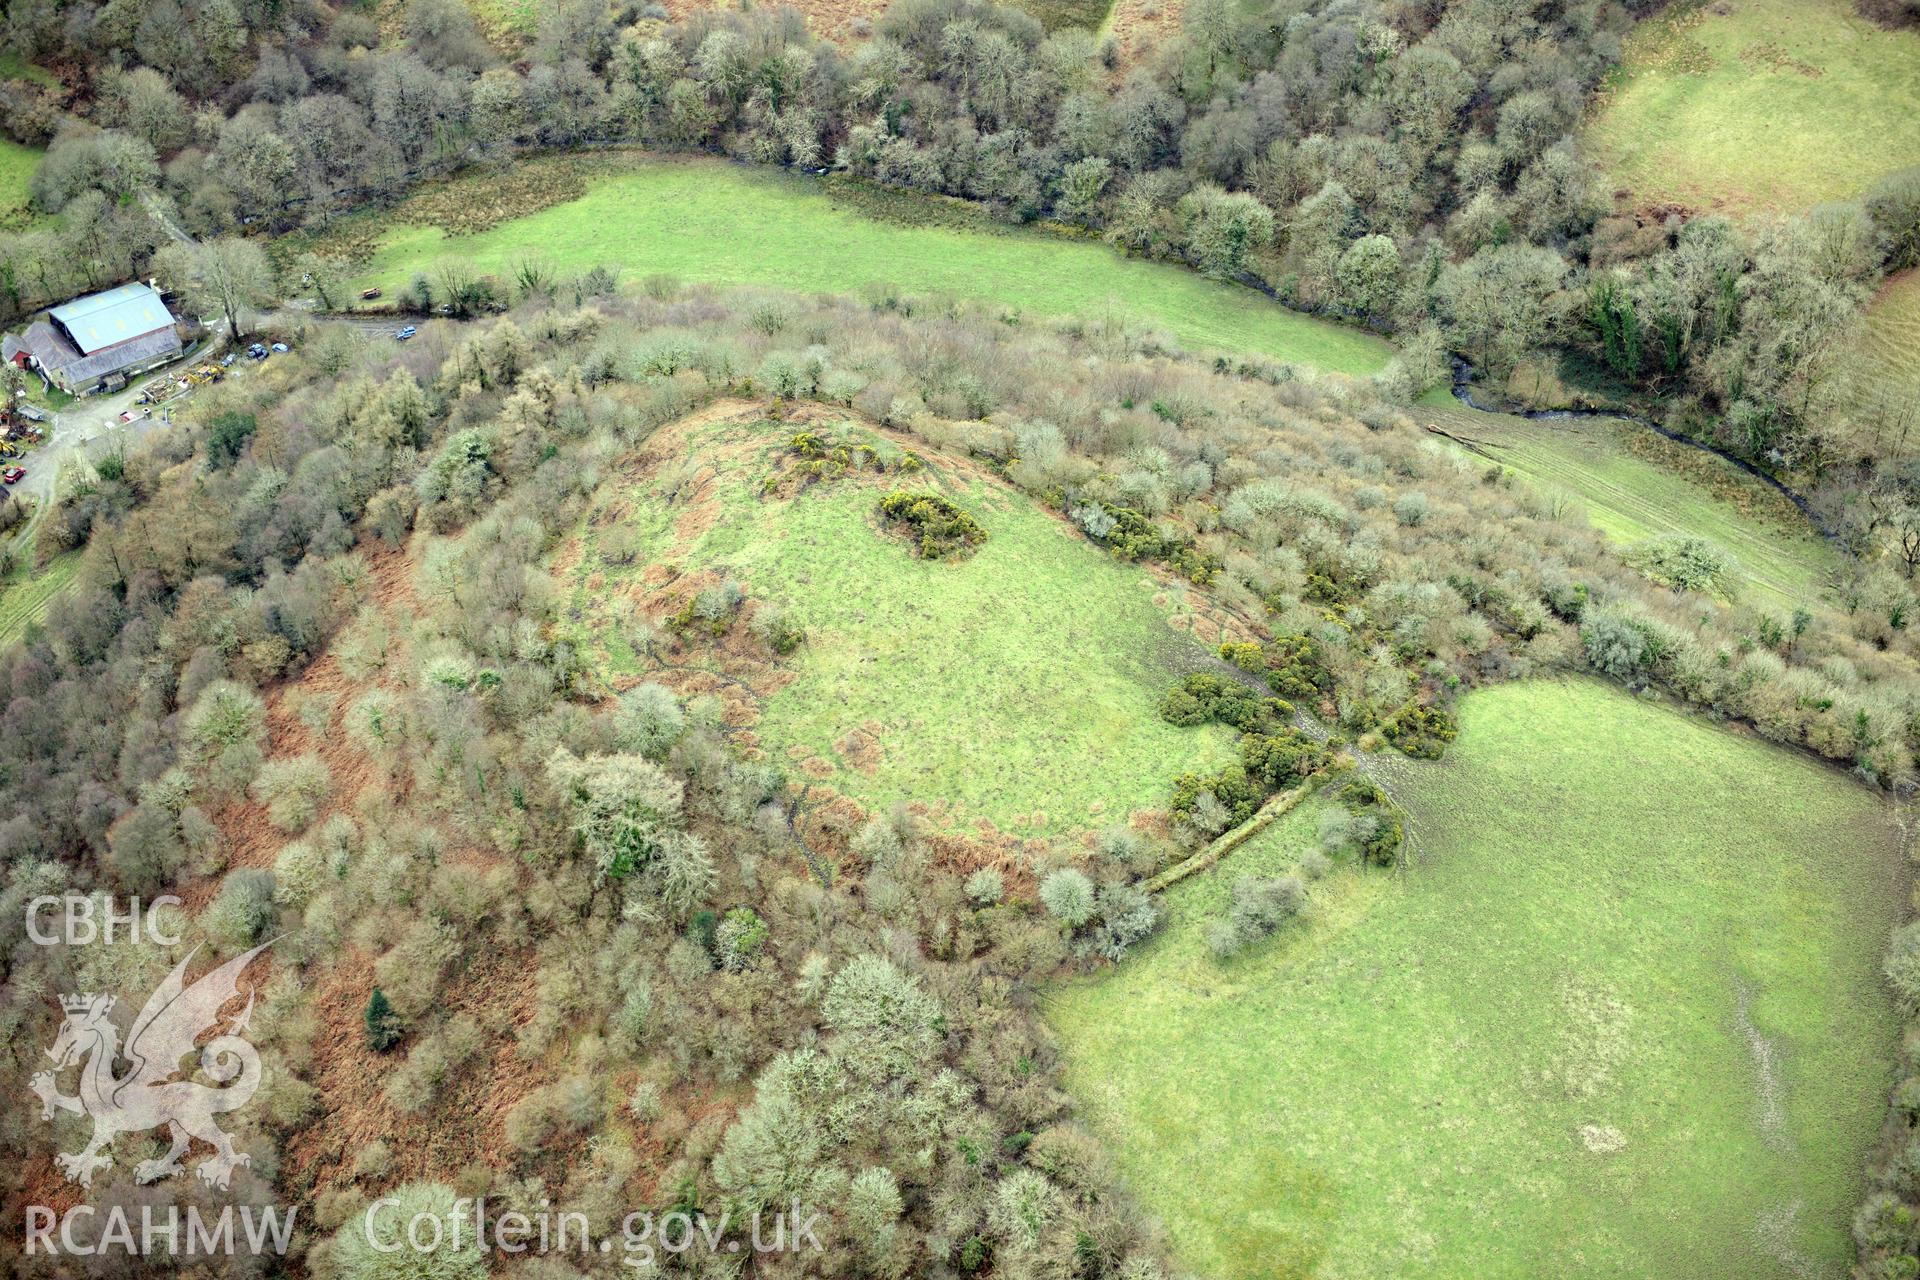 Dinas Cerdin hillfort, near Ffostrasol, Cardigan. Oblique aerial photograph taken during the Royal Commission's programme of archaeological aerial reconnaissance by Toby Driver on 13th March 2015.